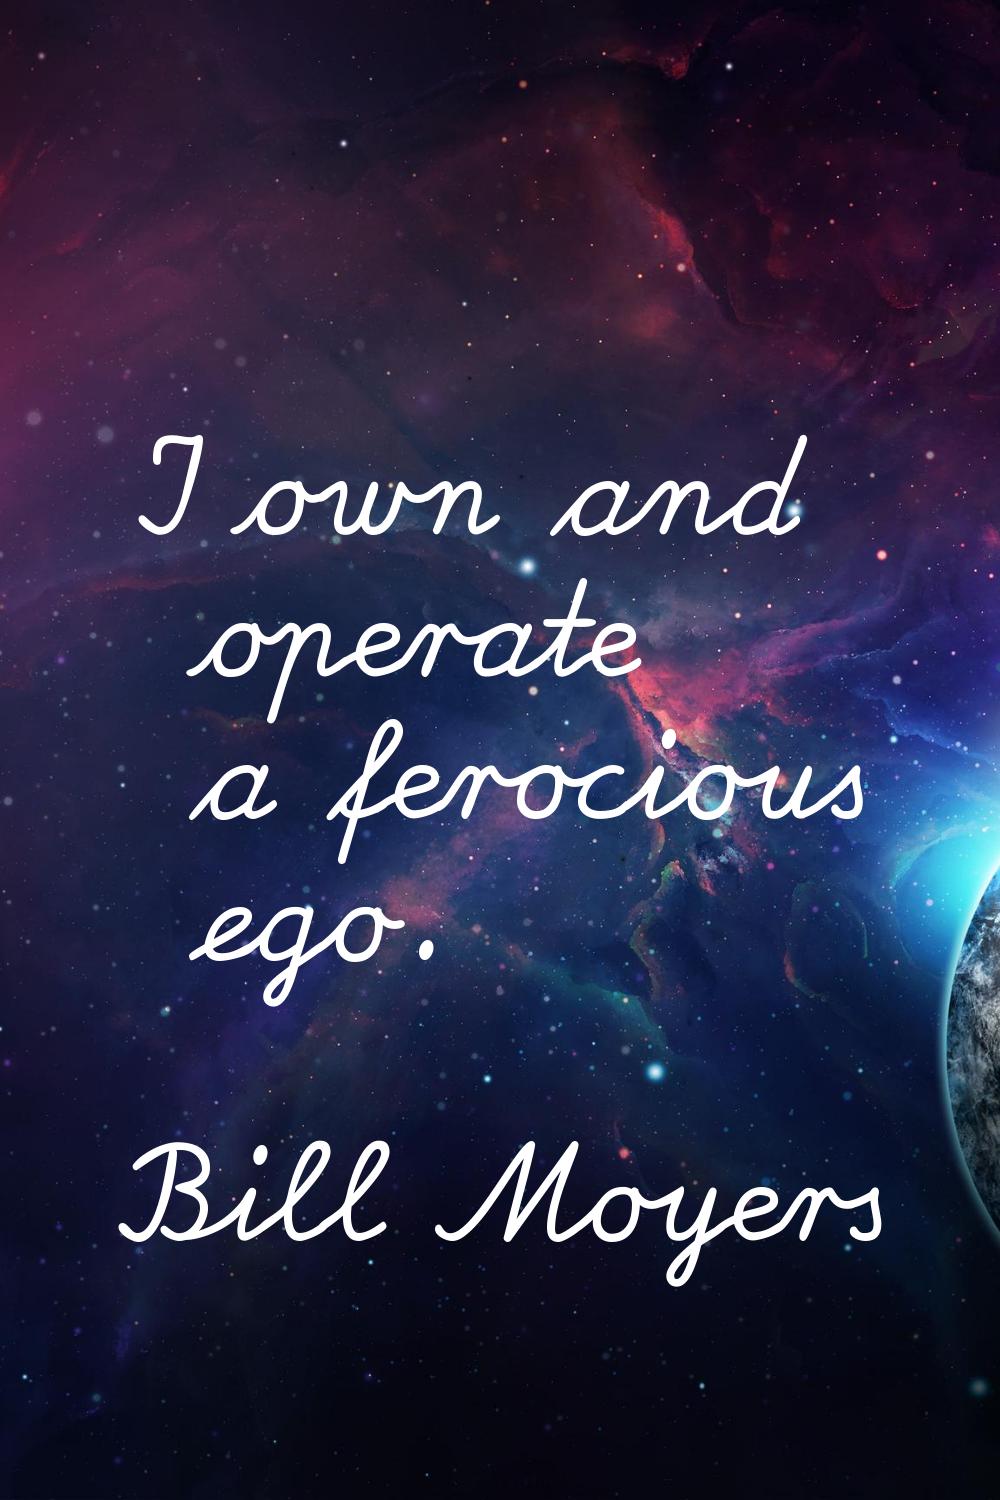 I own and operate a ferocious ego.